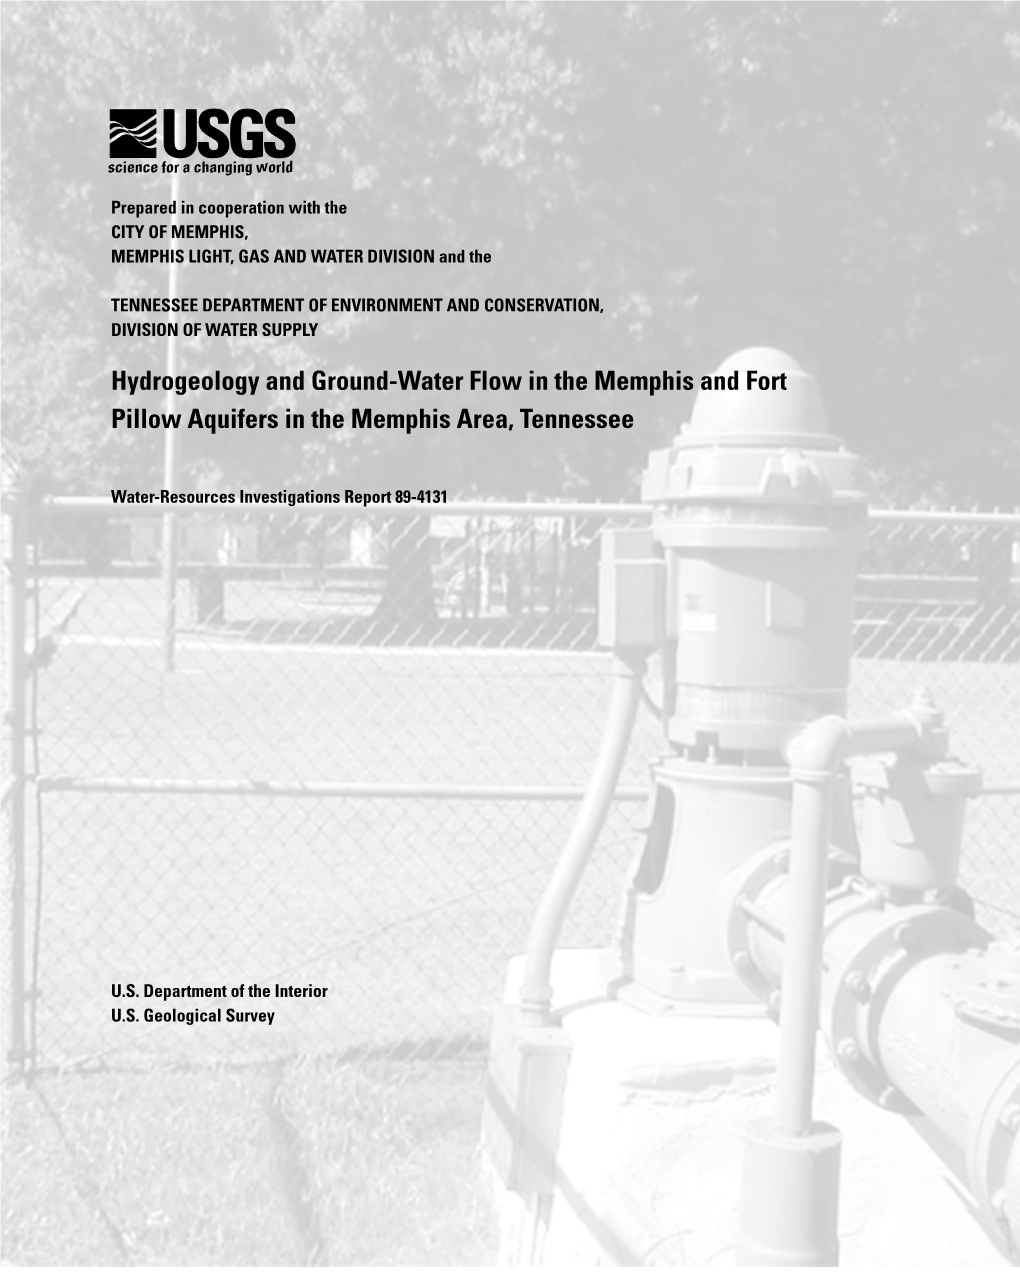 Hydrogeology and Ground-Water Flow in the Memphis and Fort Pillow Aquifers in the Memphis Area, Tennessee